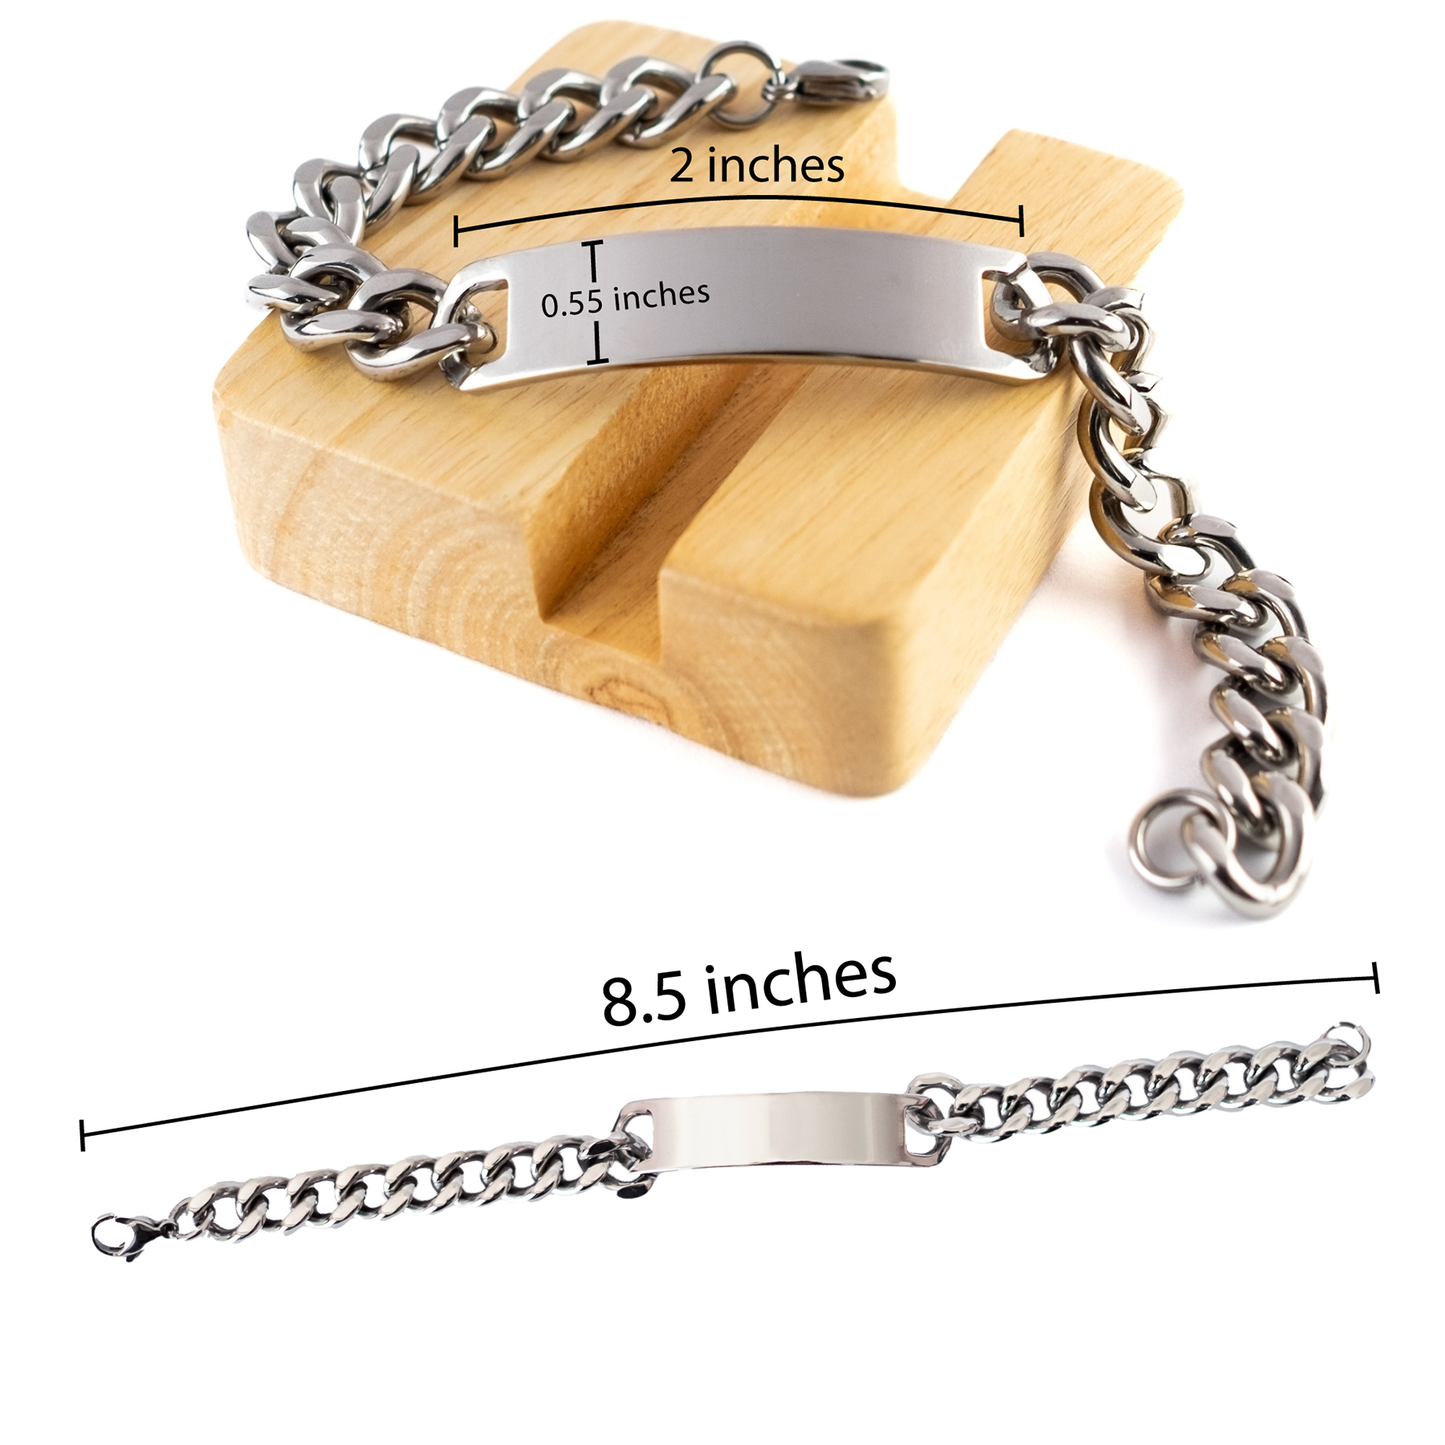 To My Girlfriend Thank You Gifts, You are appreciated more than you know, Appreciation Cuban Chain Stainless Steel Bracelet for Girlfriend, Birthday Unique Gifts for Girlfriend